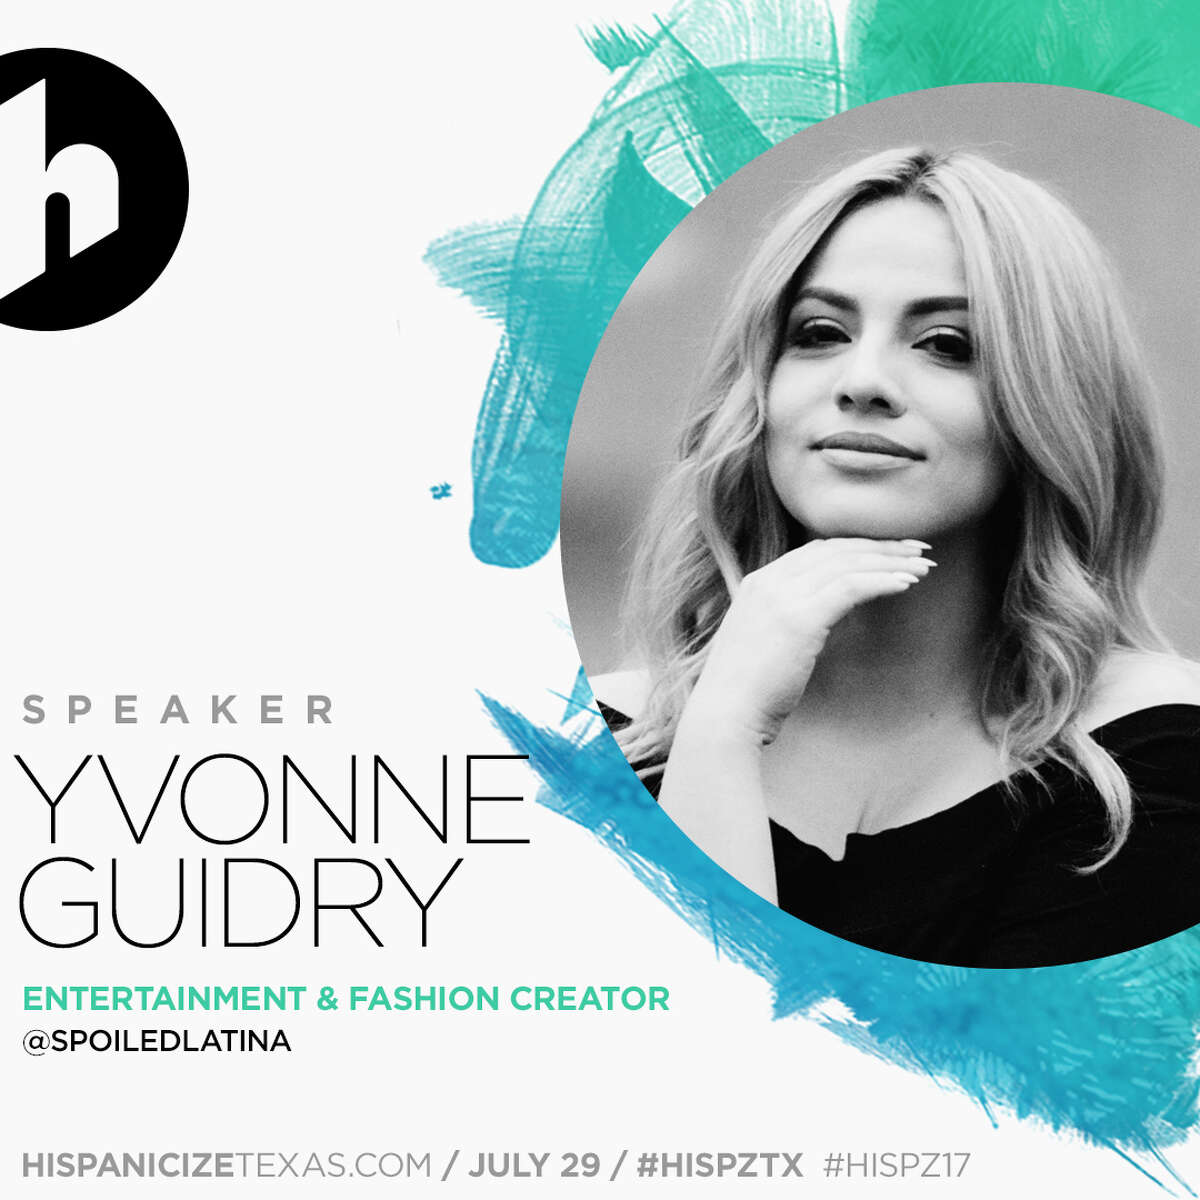 Hispanicize Texas is part of the largest annual events for Latino trendsetters and newsmakers in digital content creation, journalism, marketing, entertainment and tech entrepreneurship.